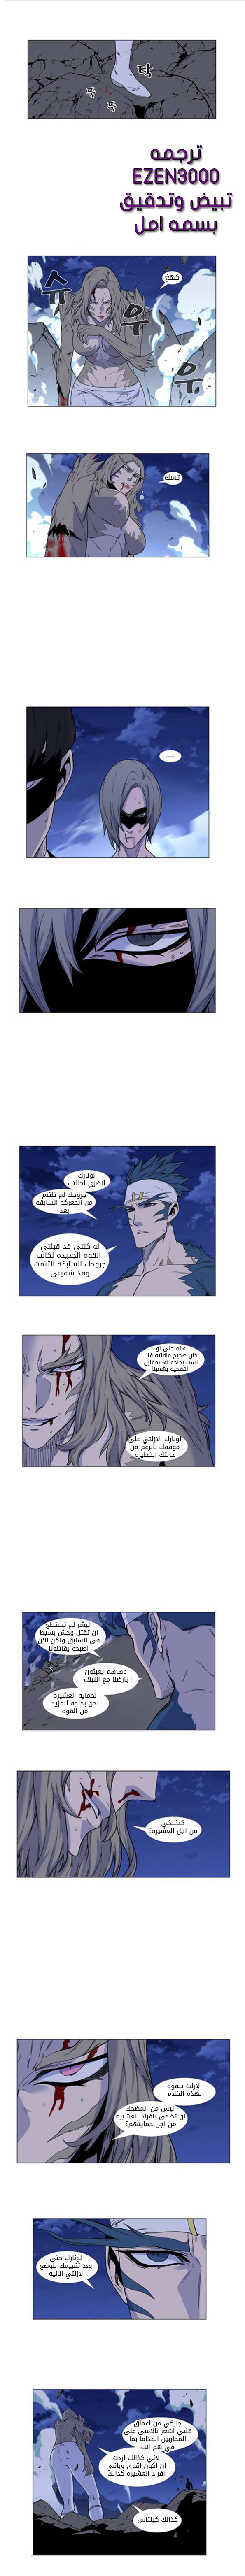 Noblesse: Chapter 456 - Page 1